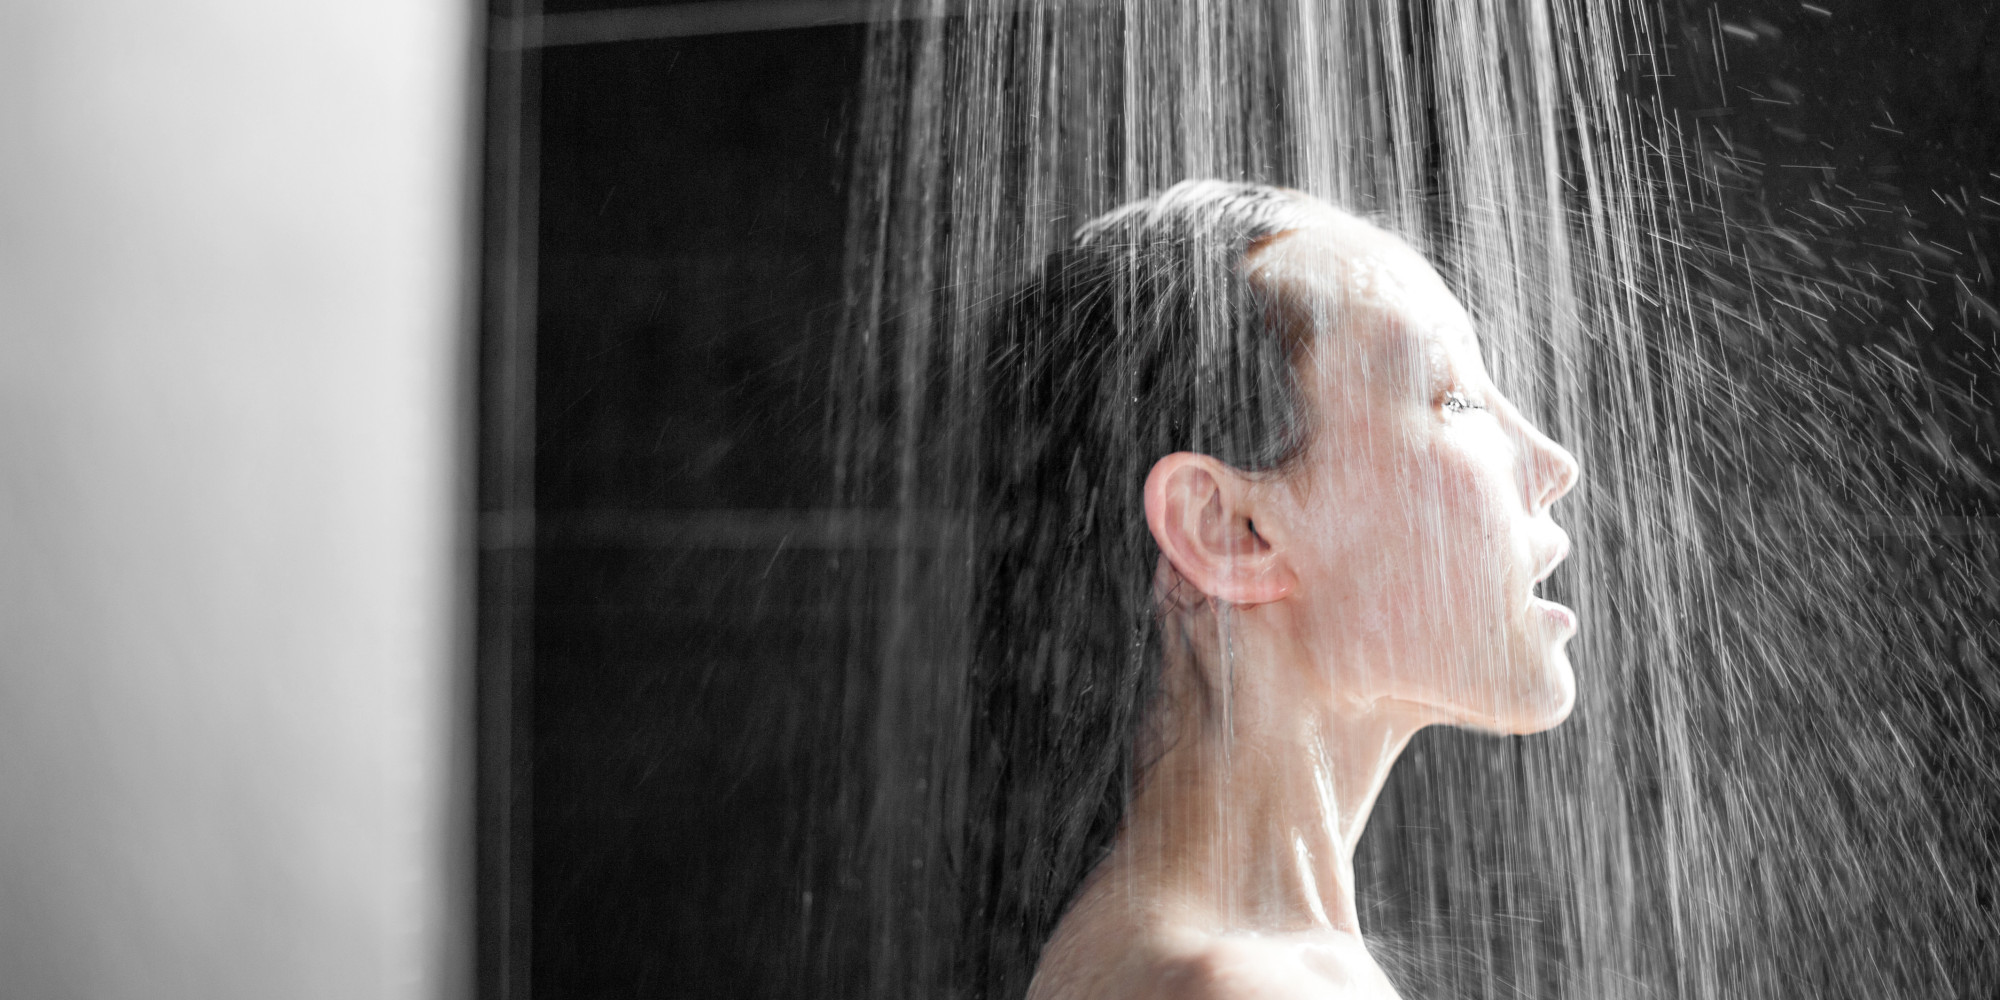 Benefits of The cold showers